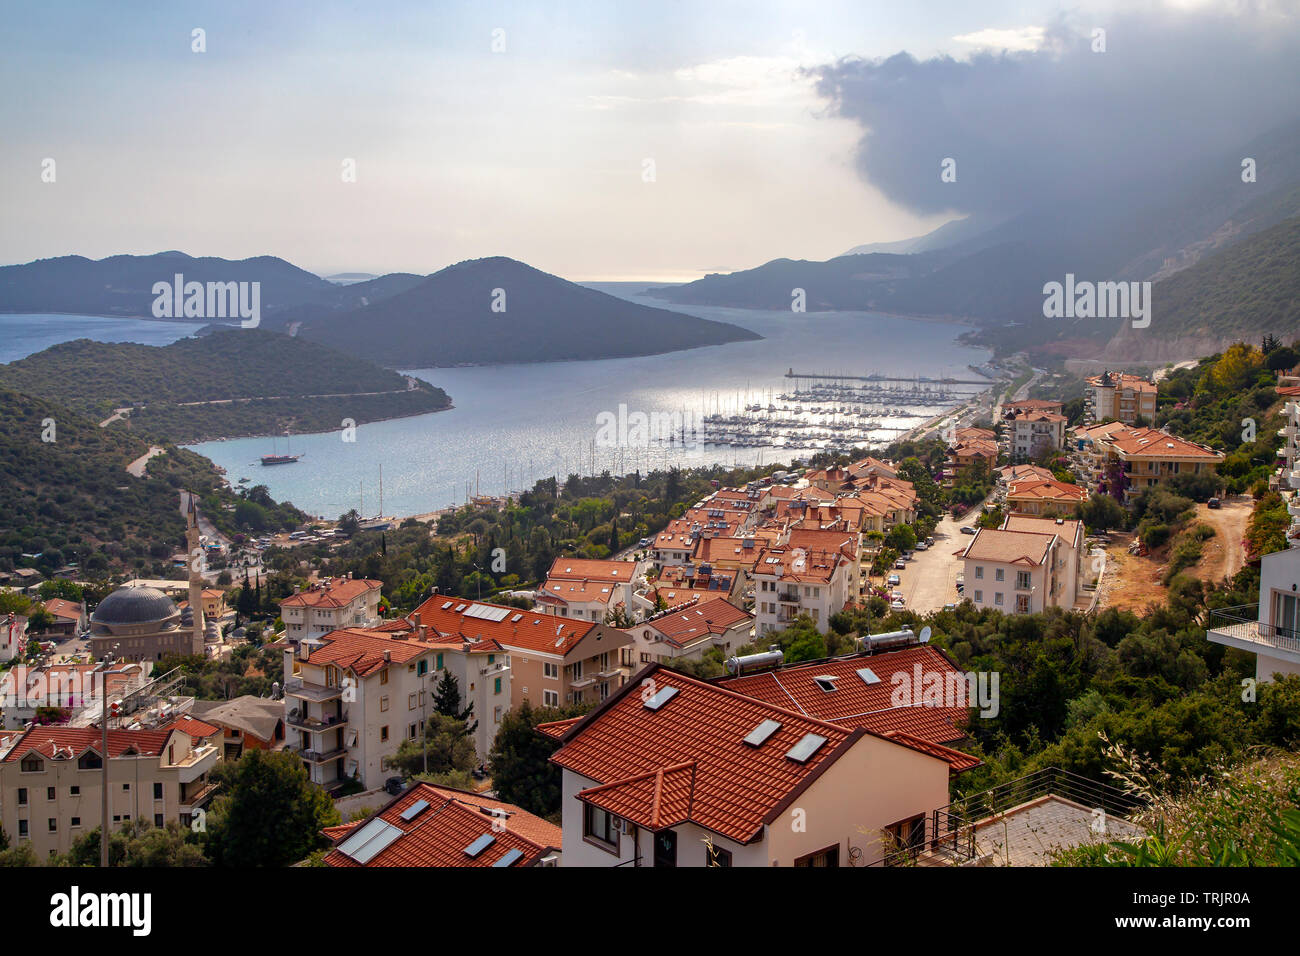 Kas city and marina view in a cloudy day. Kas is a very famous touristic town in Antalya, Turkey Stock Photo